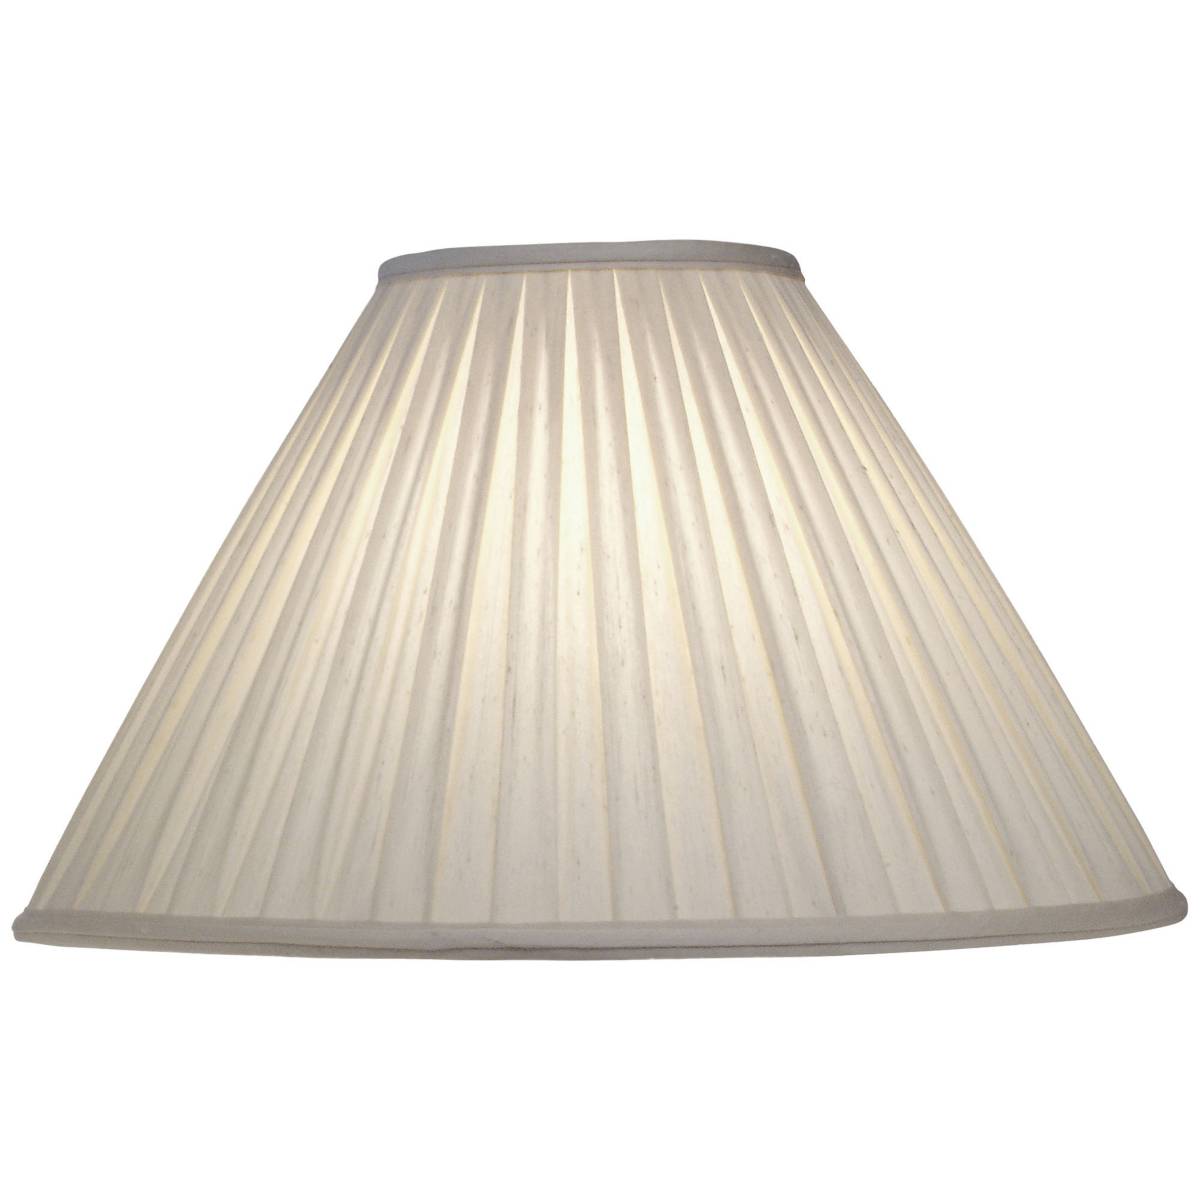 Brown, Traditional, Pleated, Lamp Shades | Lamps Plus